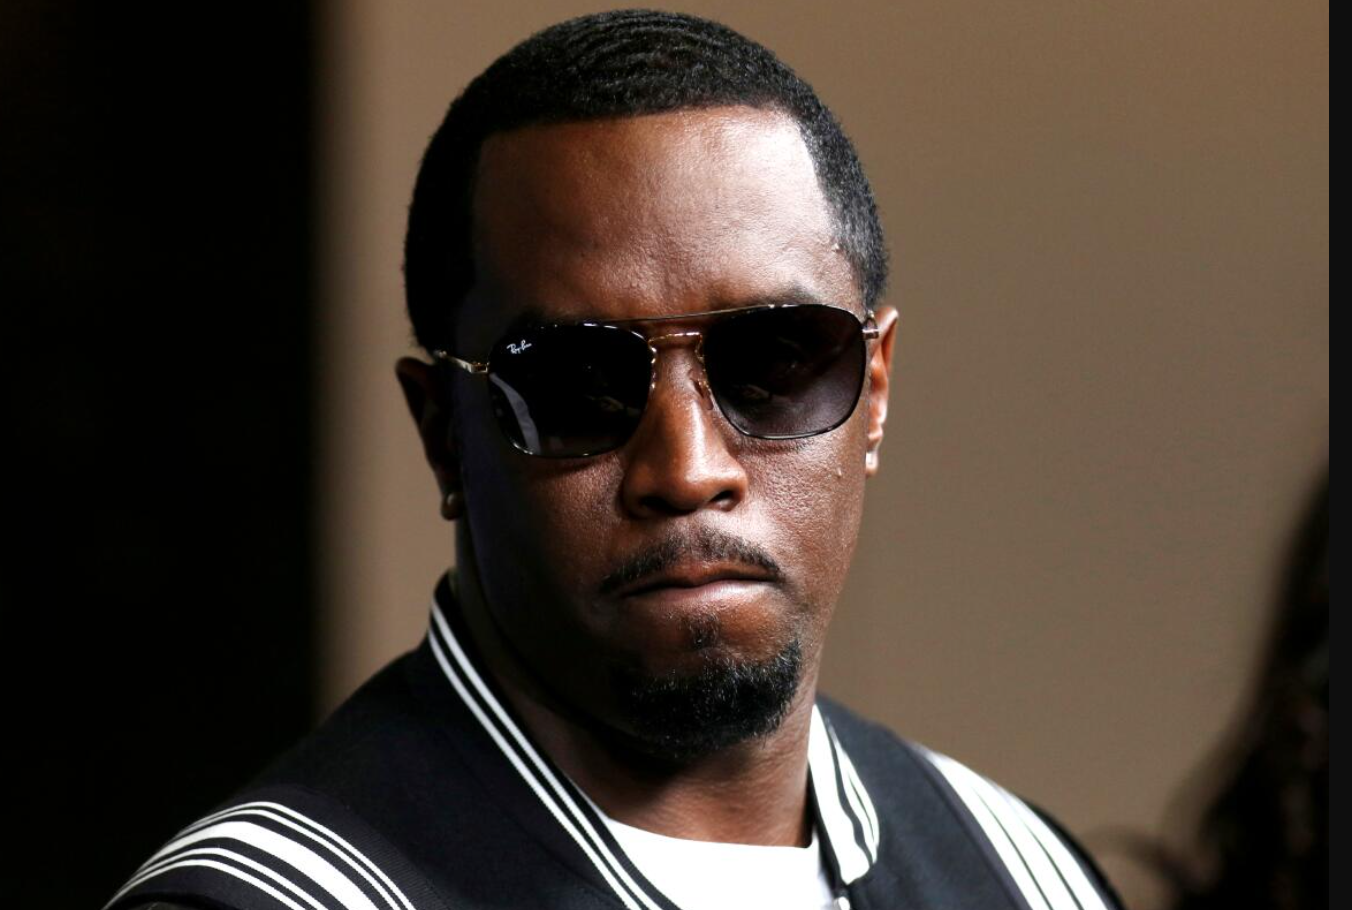 Federal Raids Uncover Firearms and Allegations Against Sean Diddy Combs